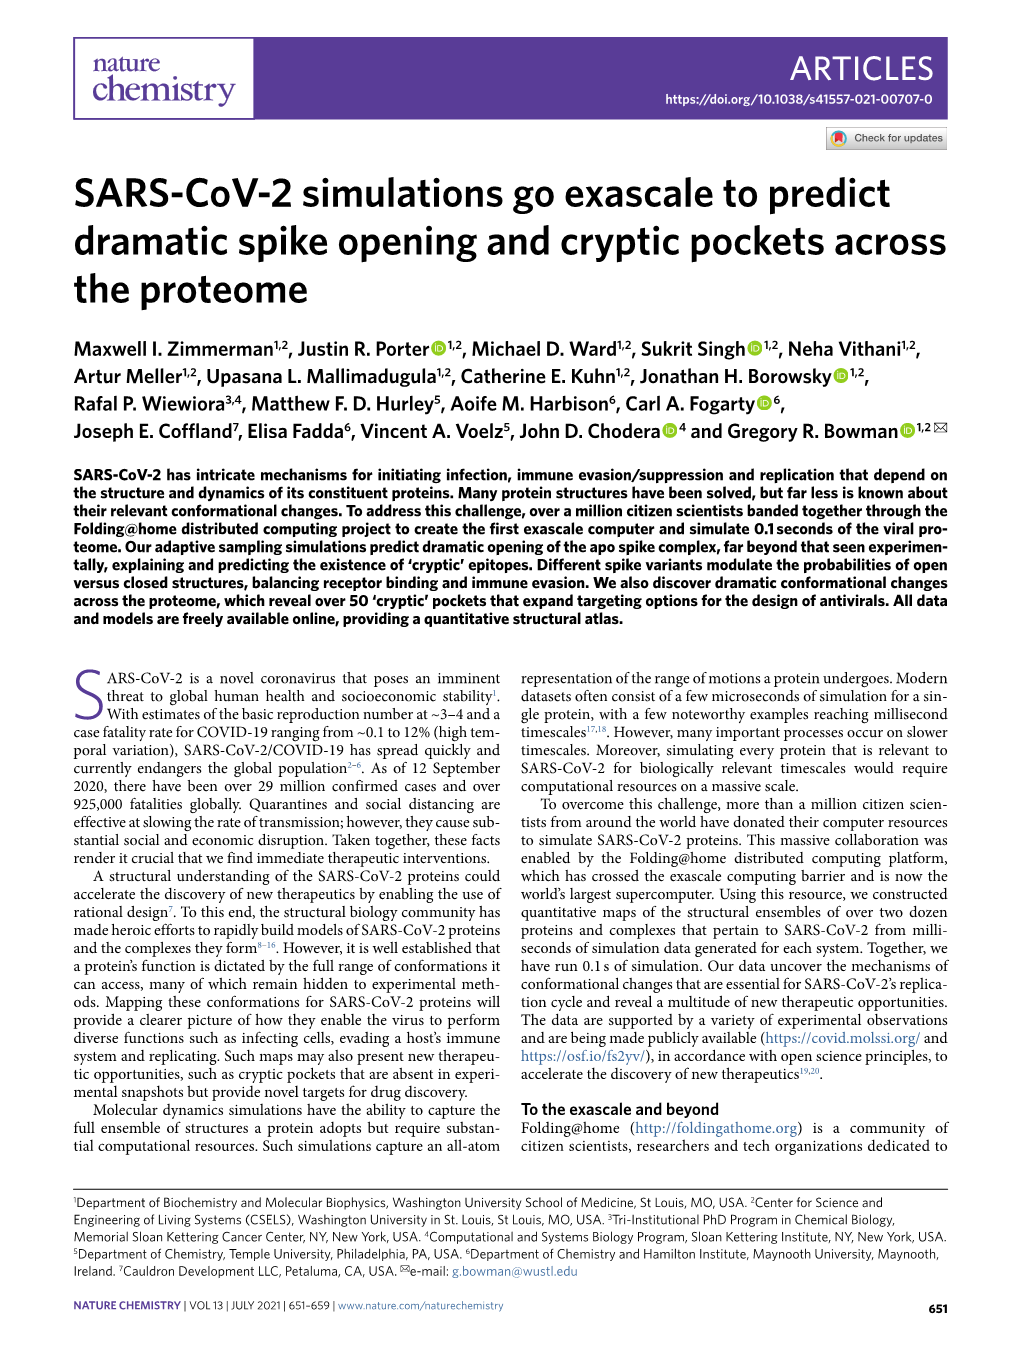 SARS-Cov-2 Simulations Go Exascale to Predict Dramatic Spike Opening and Cryptic Pockets Across the Proteome